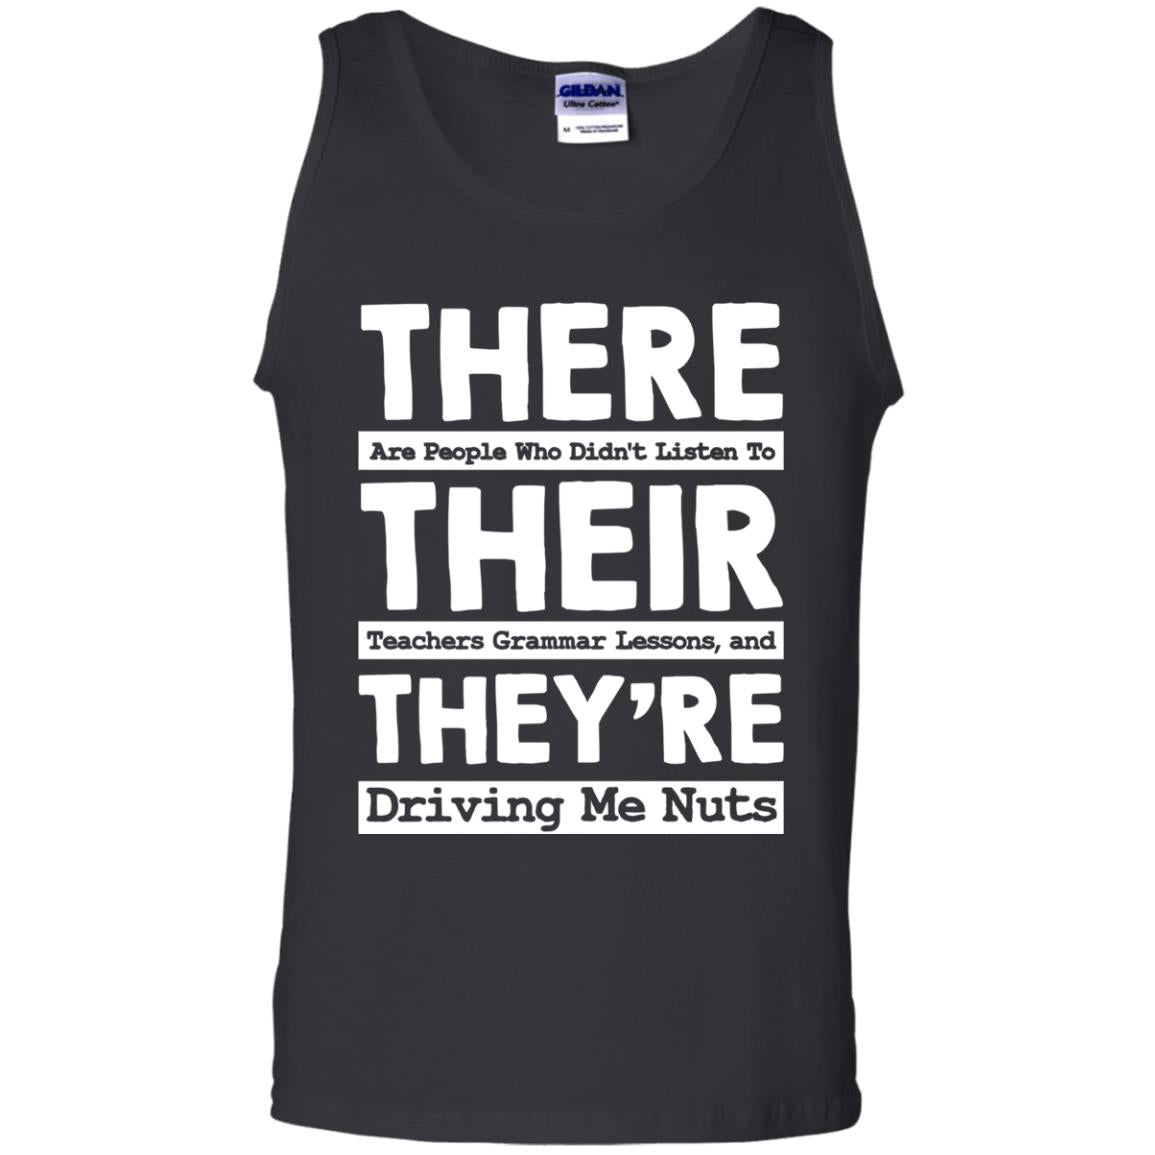 There Are People Who Didn't Listen To Their Teachers Grammar Lessons, And They're Driving Me Nuts TshirtG220 Gildan 100% Cotton Tank Top